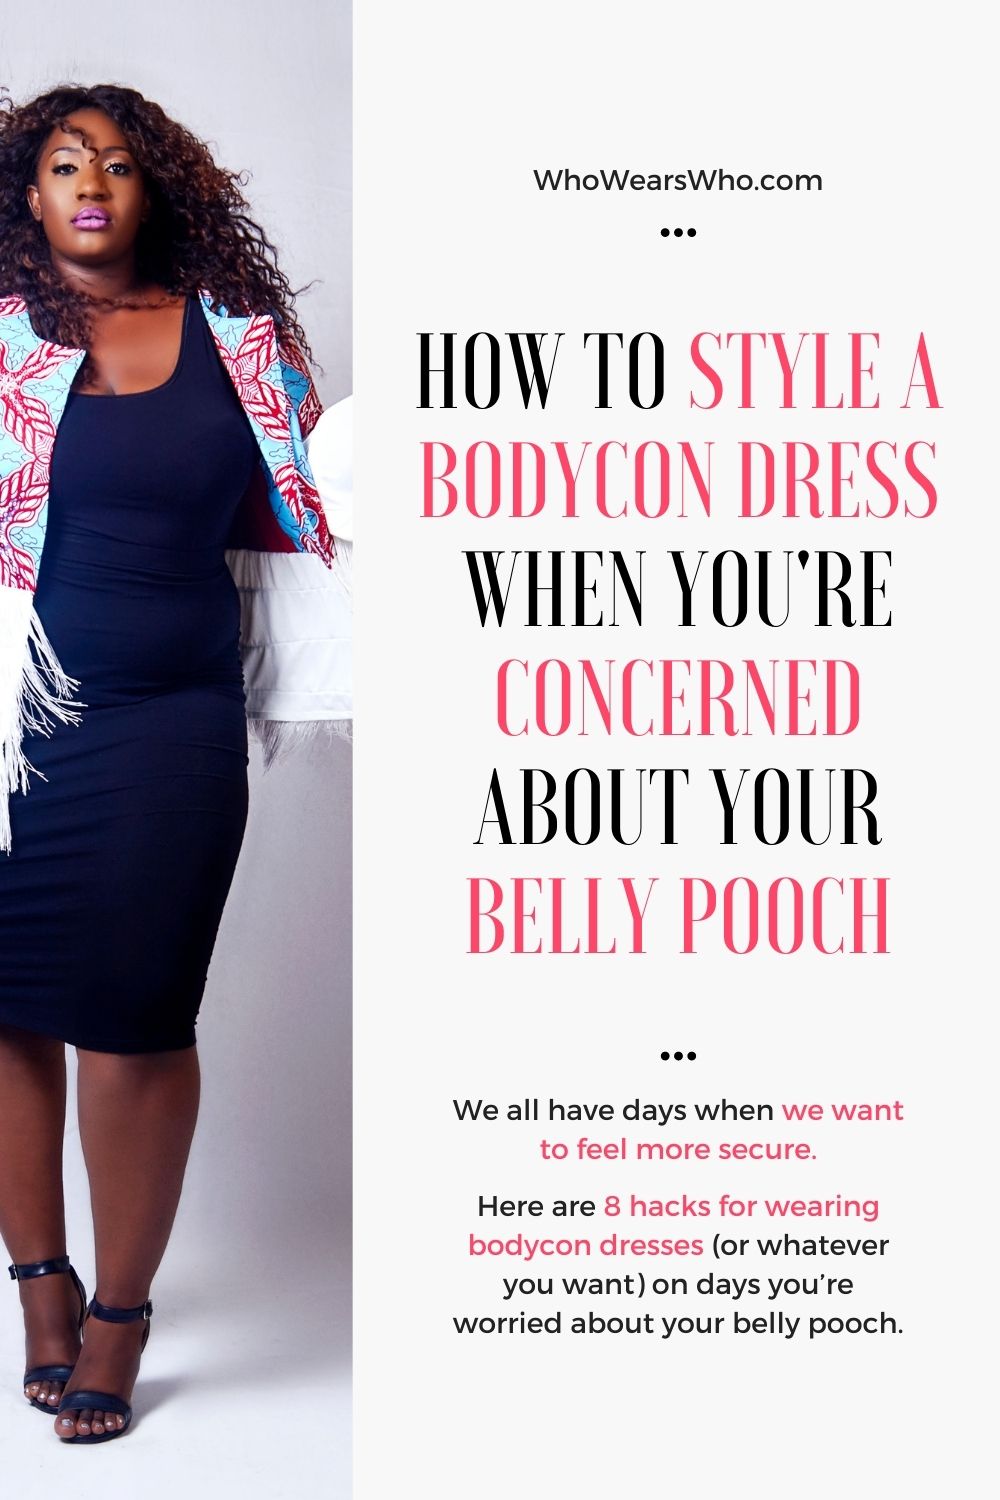 How to style a bodycon dress 2